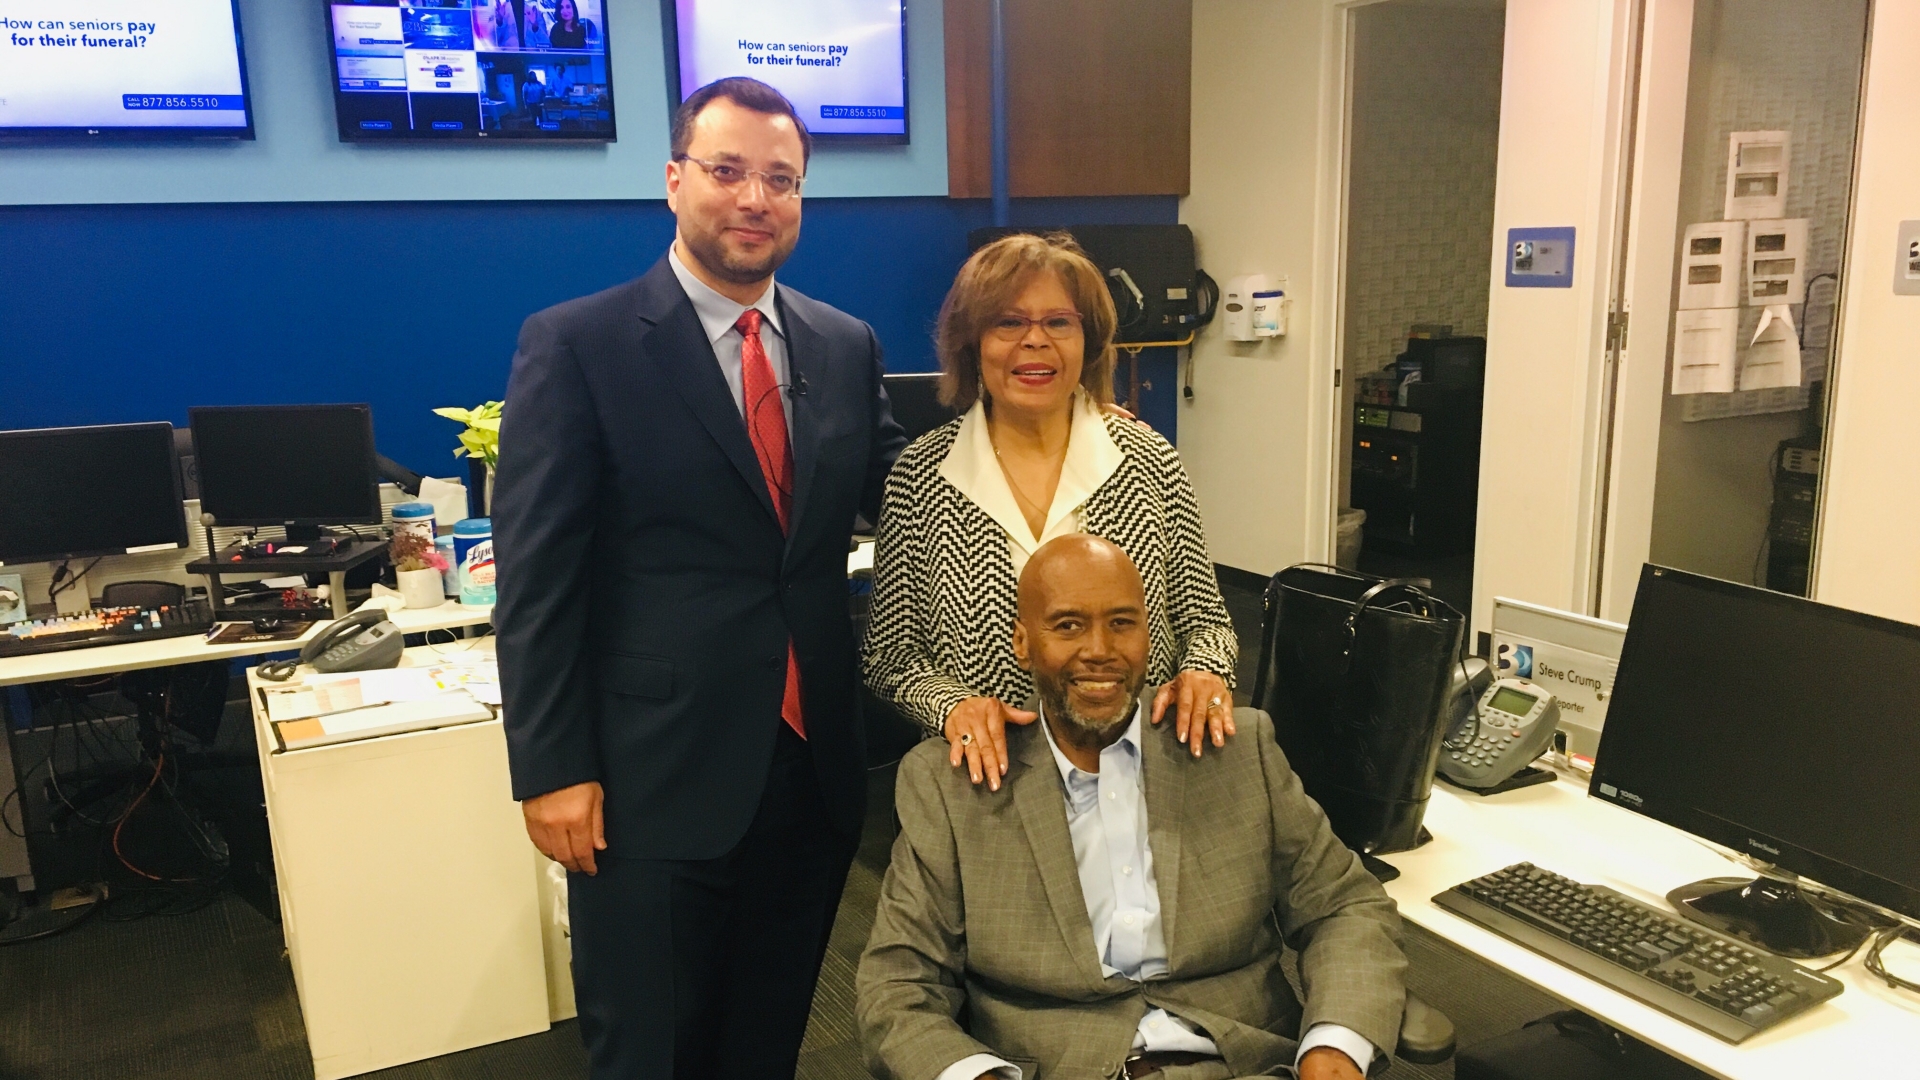 For nearly 40 years, reporter Steve Crump has used his platform on WBTV to share stories close to his heart. And after a cancer diagnosis last year, he’s connecting with viewers to raise awareness about colon cancer. 